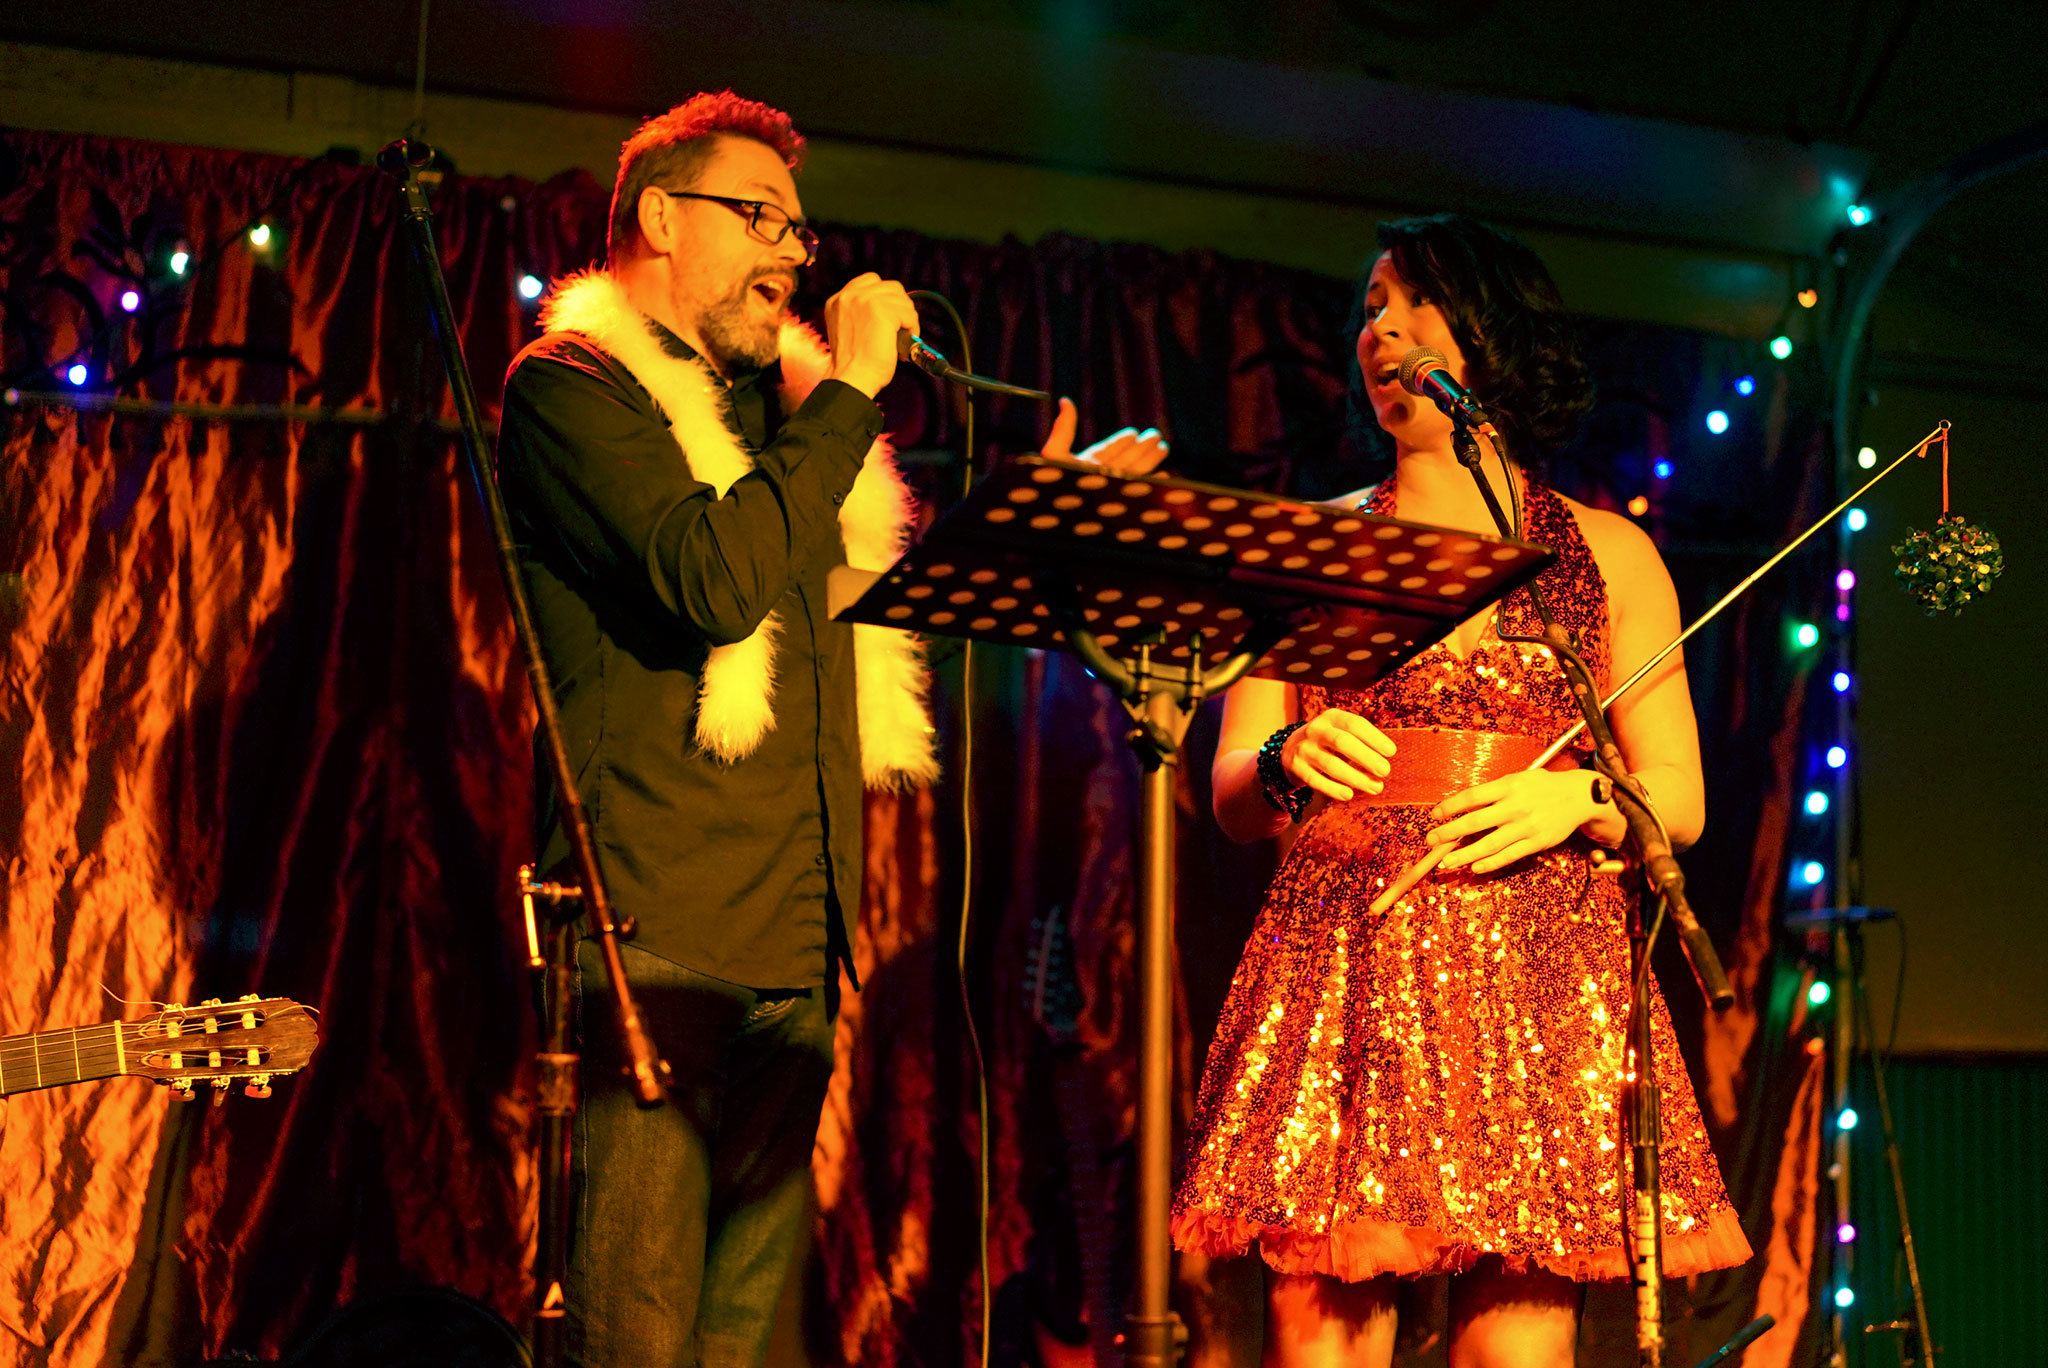 Martin Feveyear & Sarah Howard at the Will Sing for Vashon fundraiser. (Pete Welch Photo)